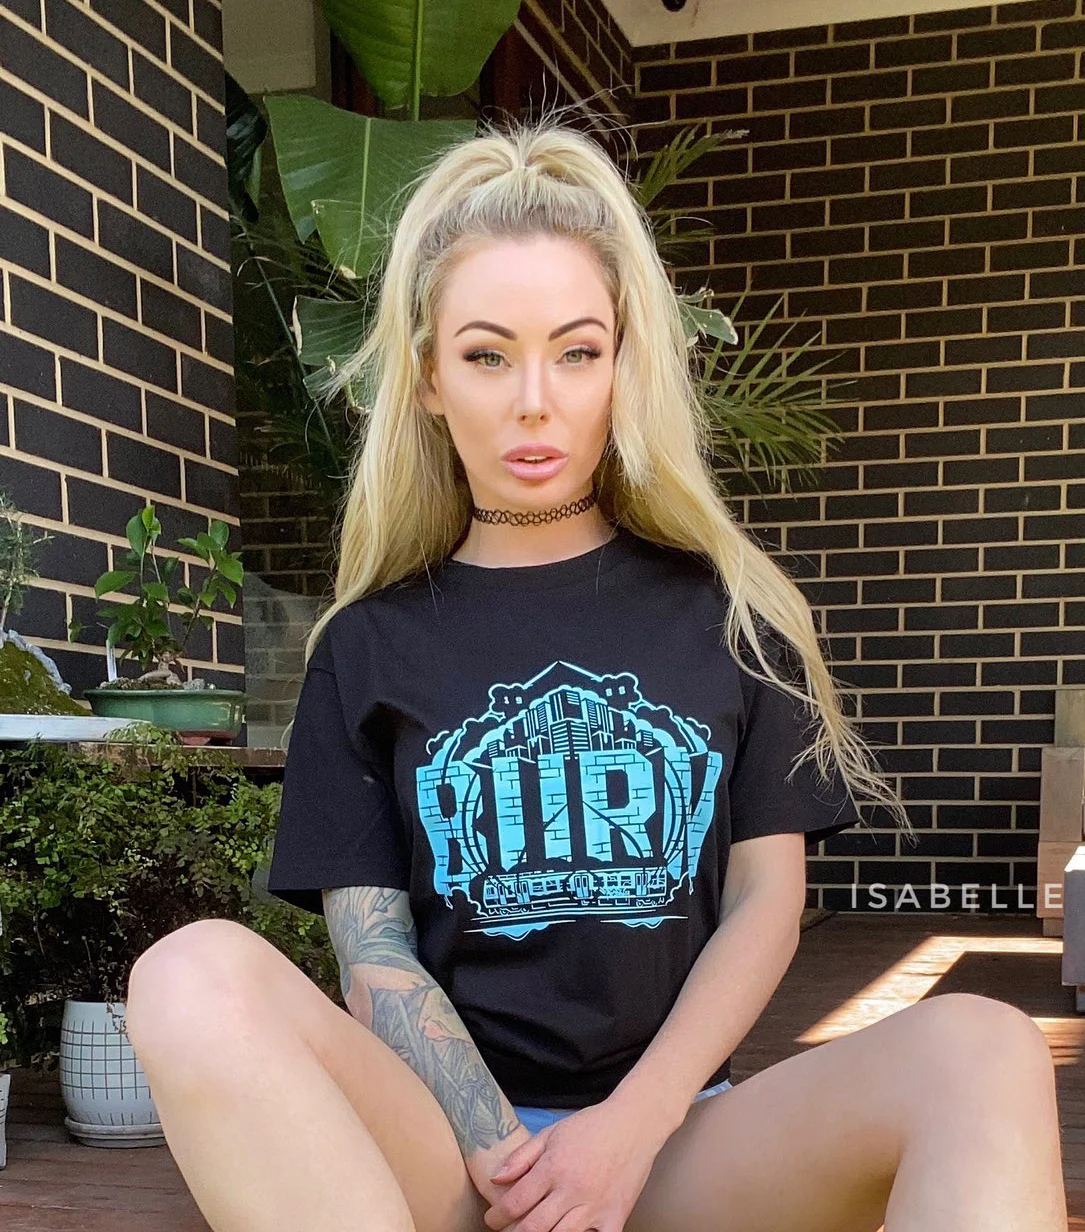 Isabelle Deltore 😈 Wiki, Biography, Age, Height, Net Worth & Photos